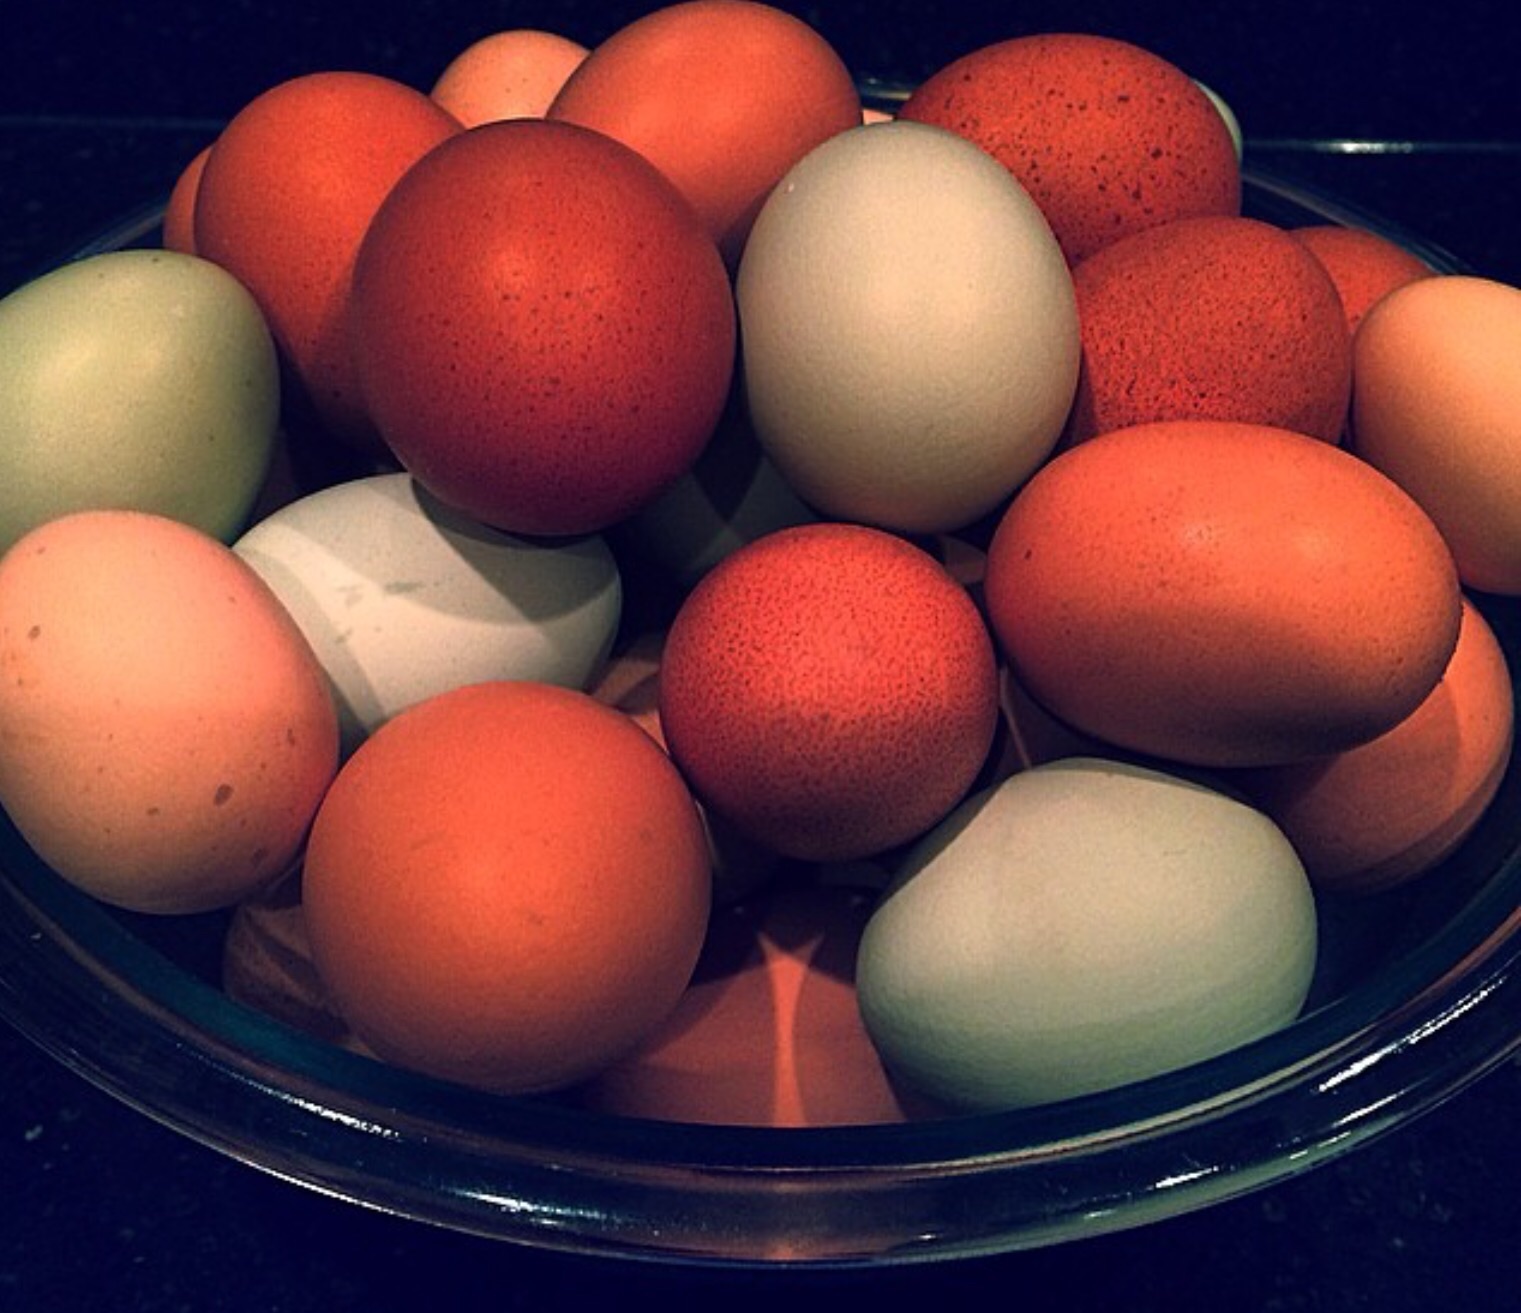 My colorful eggs!  Winter 2014